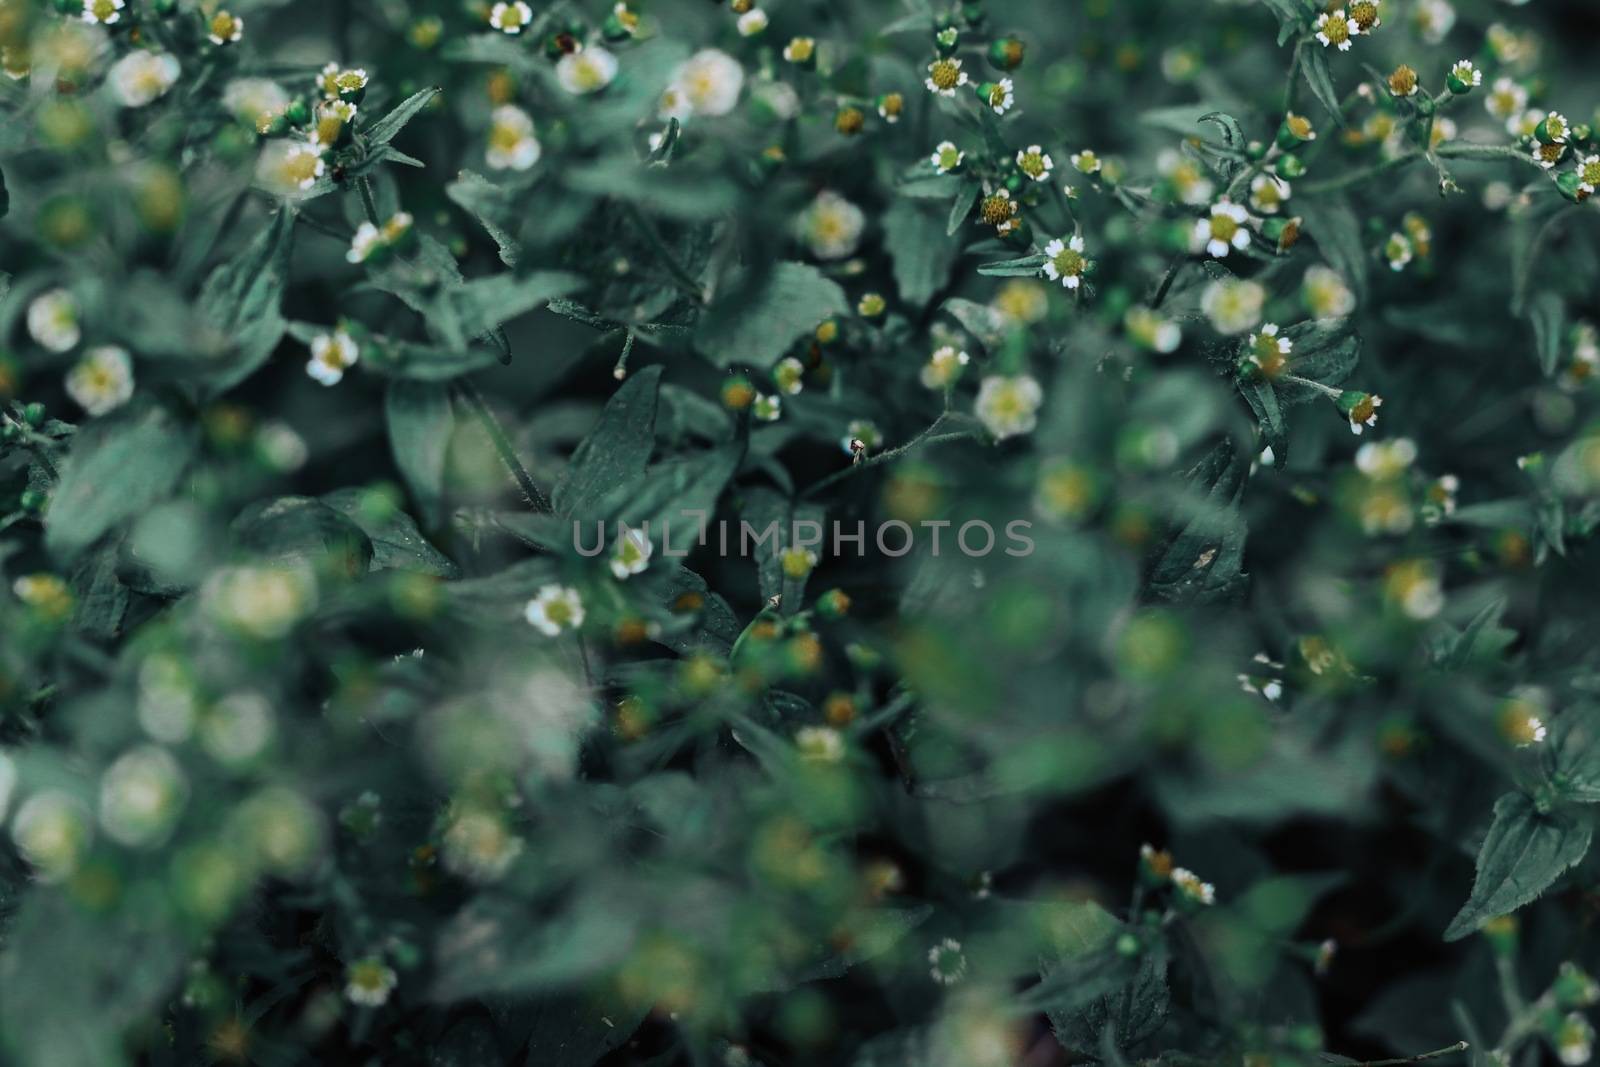 Wild flowers in nature, blurry scene by aekgasit